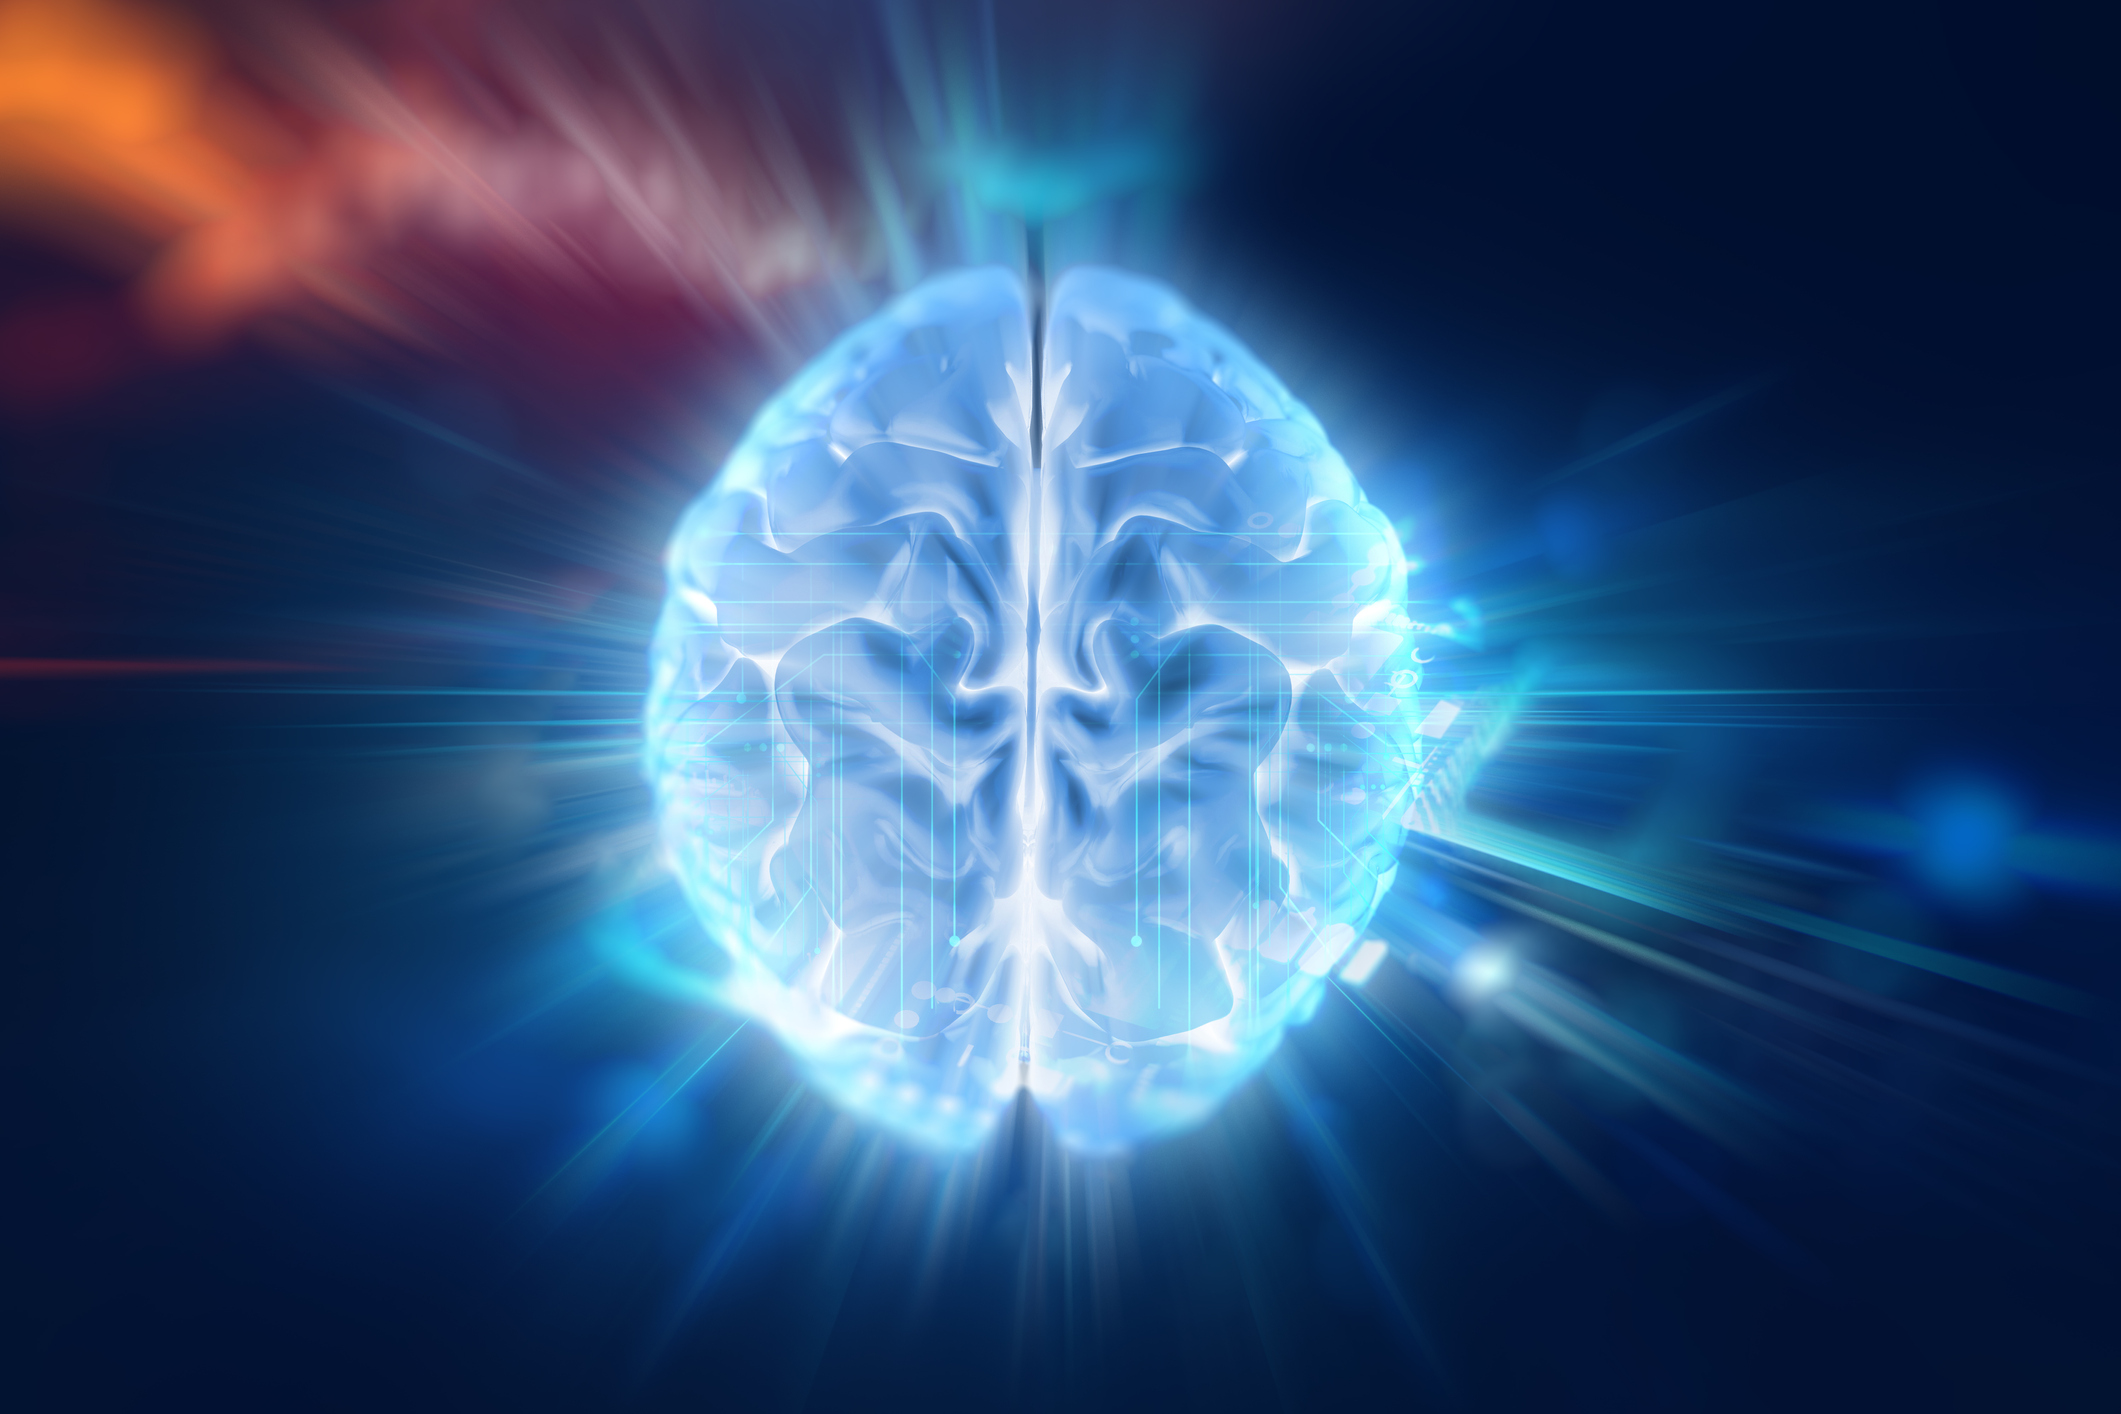 Illustration of brain on abstract background